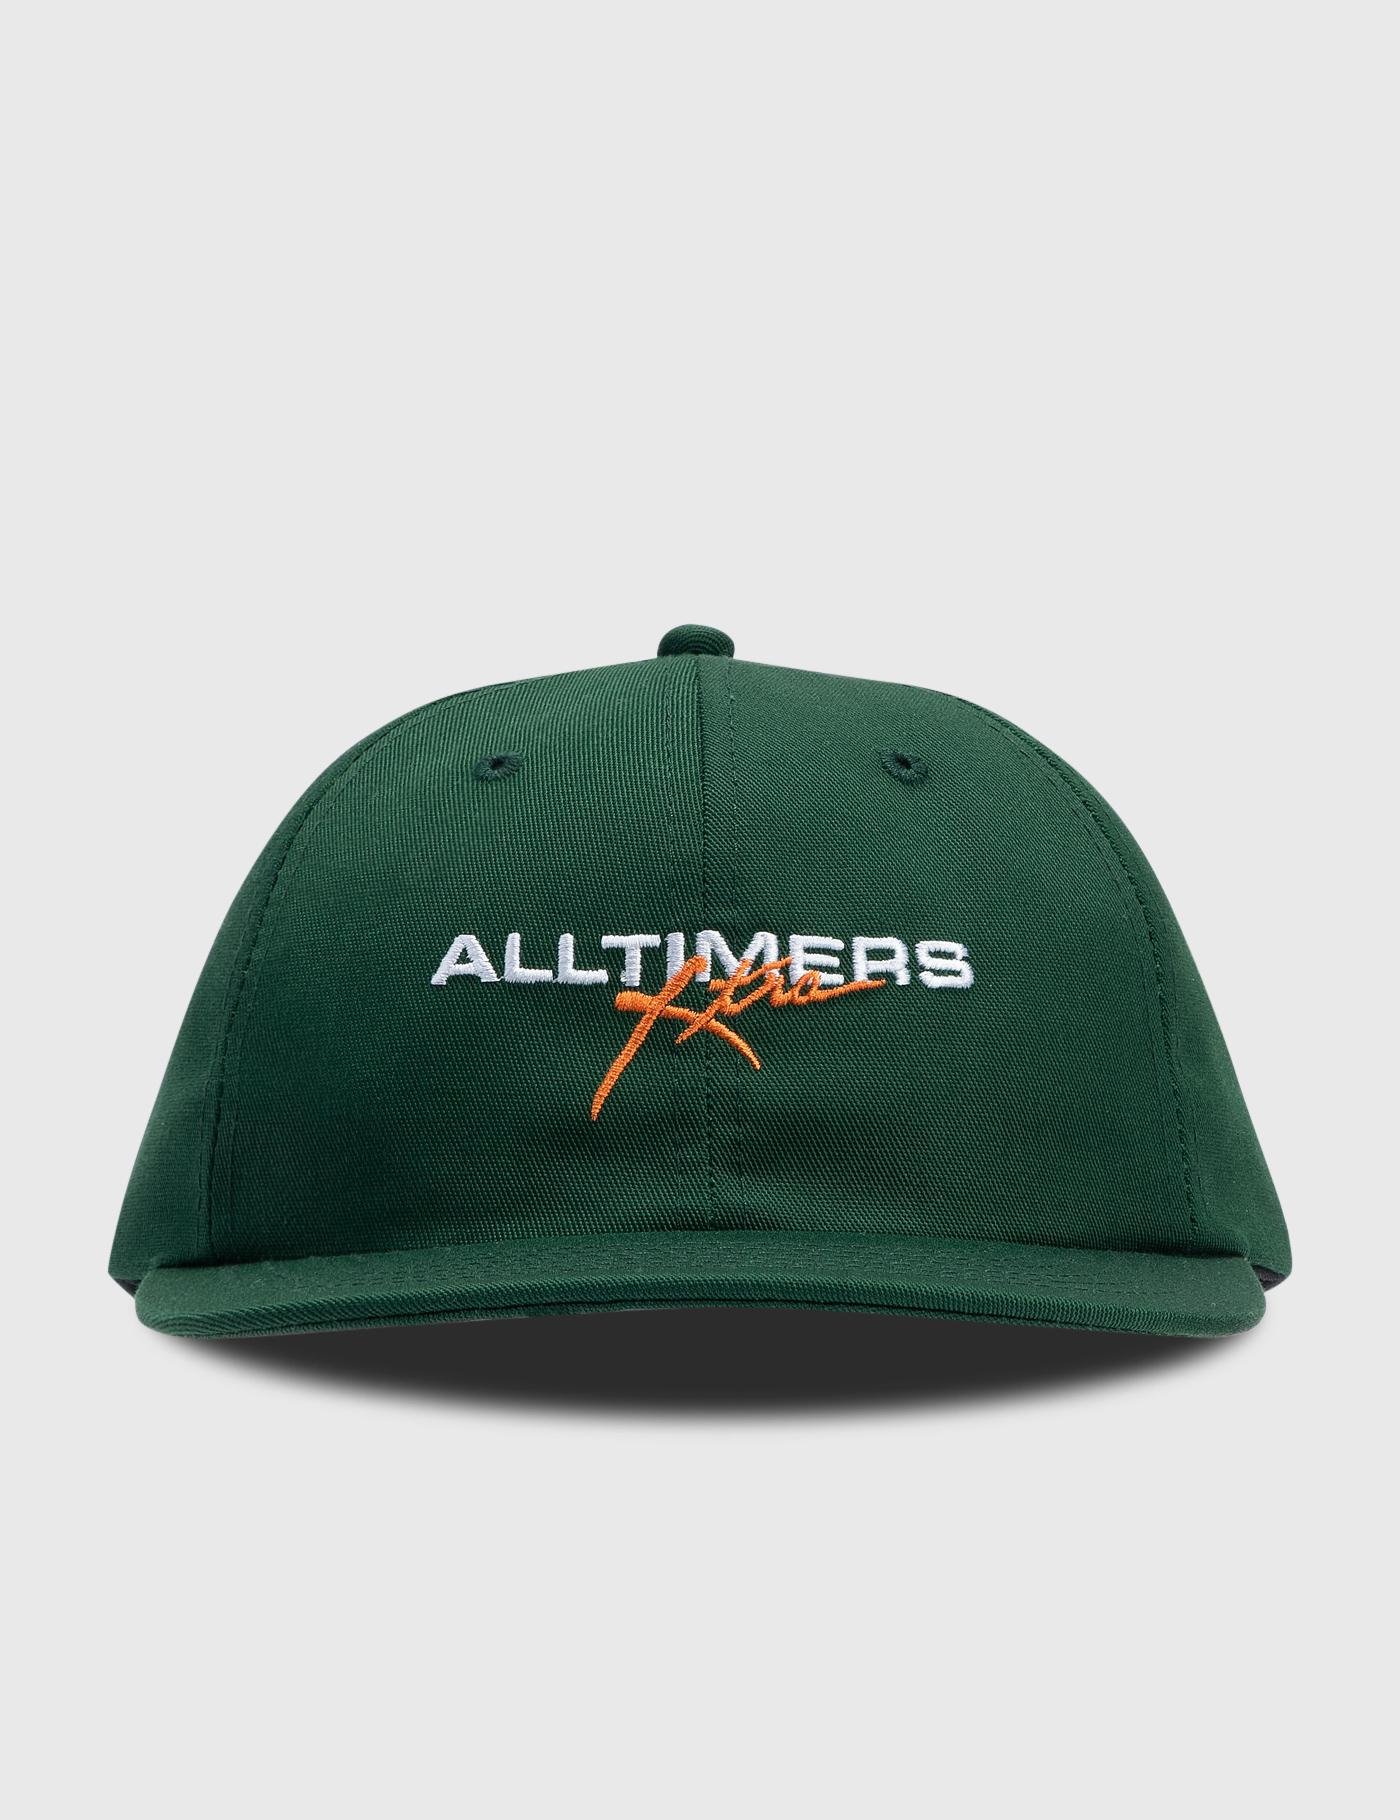 Extra Cap by ALLTIMERS